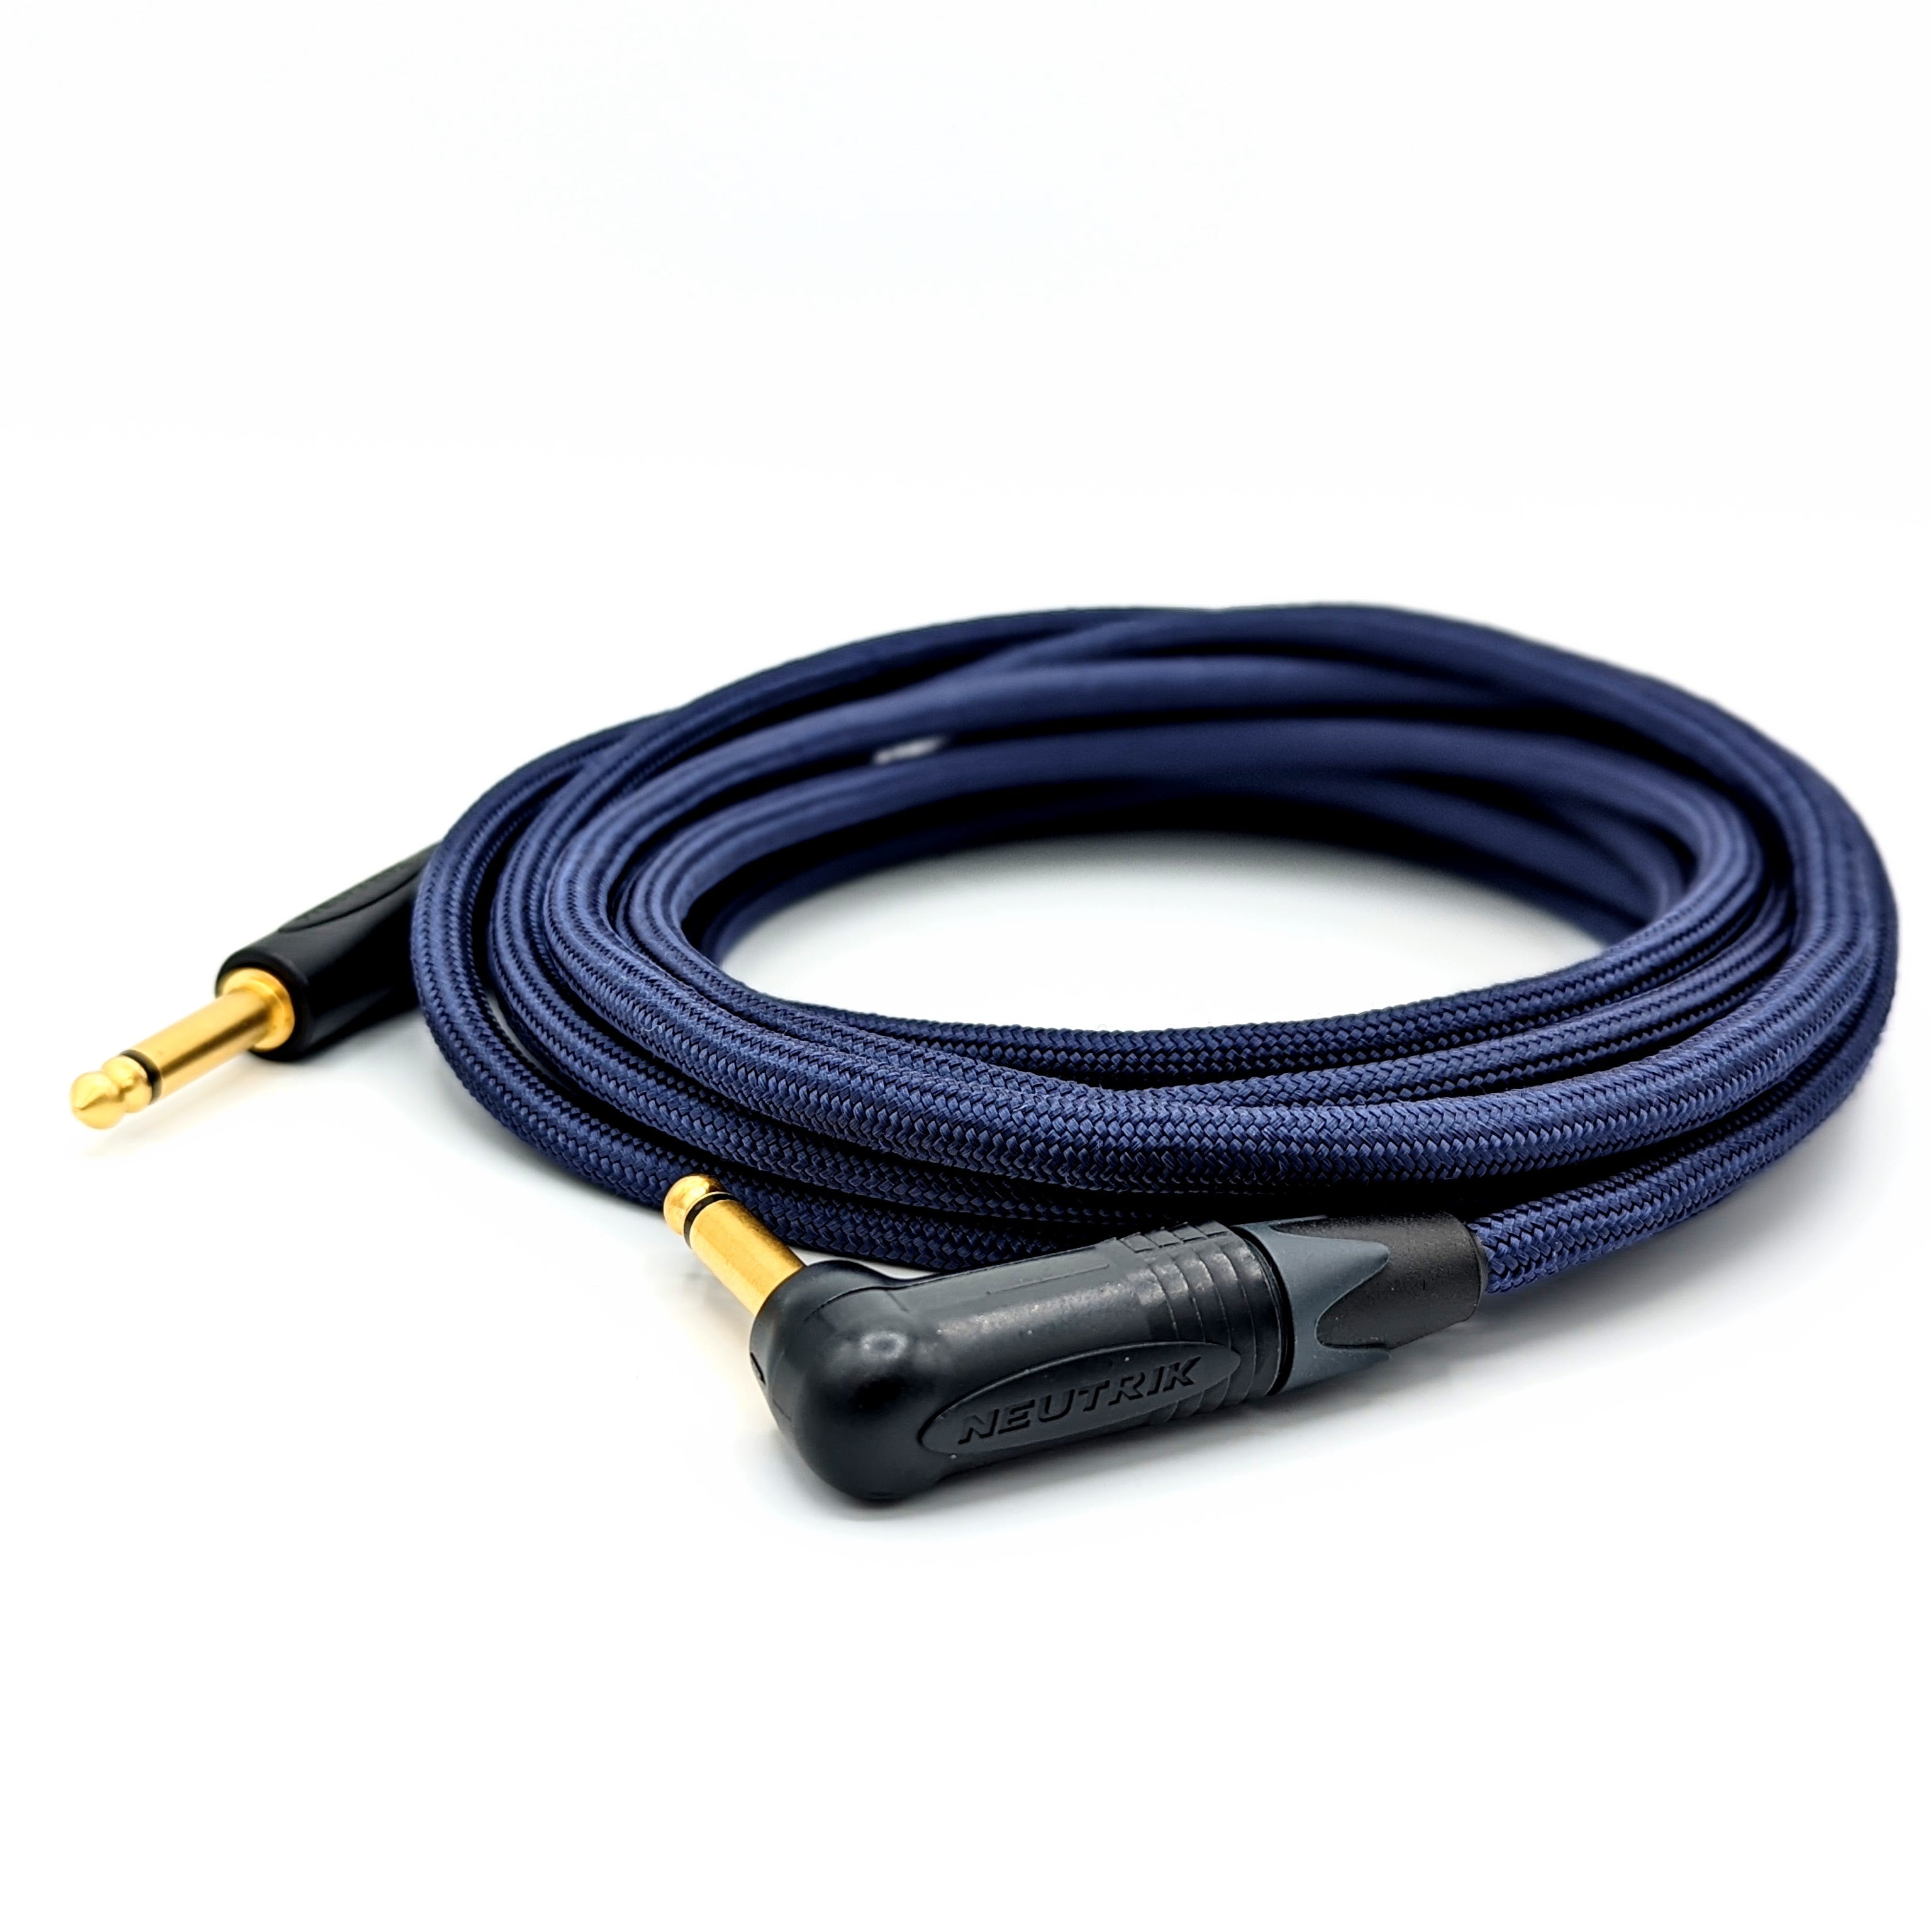 GC-3: Right Angle to Right Angle Instrument Cable (Color / Length options)